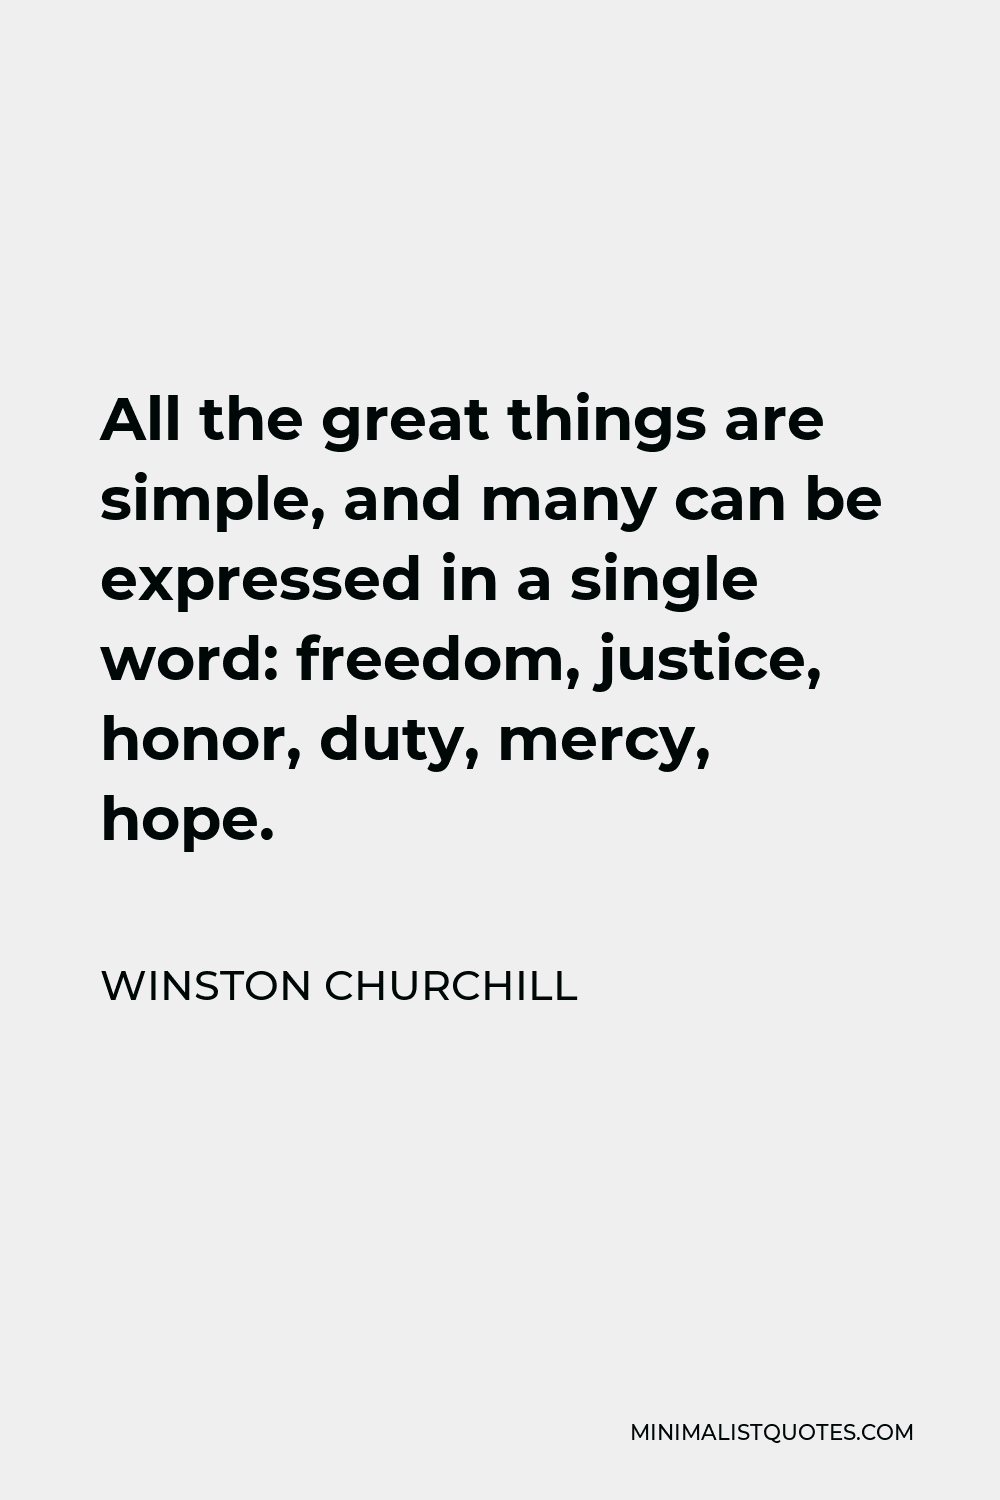 Winston Churchill Quote - All the great things are simple, and many can be expressed in a single word: freedom, justice, honor, duty, mercy, hope.